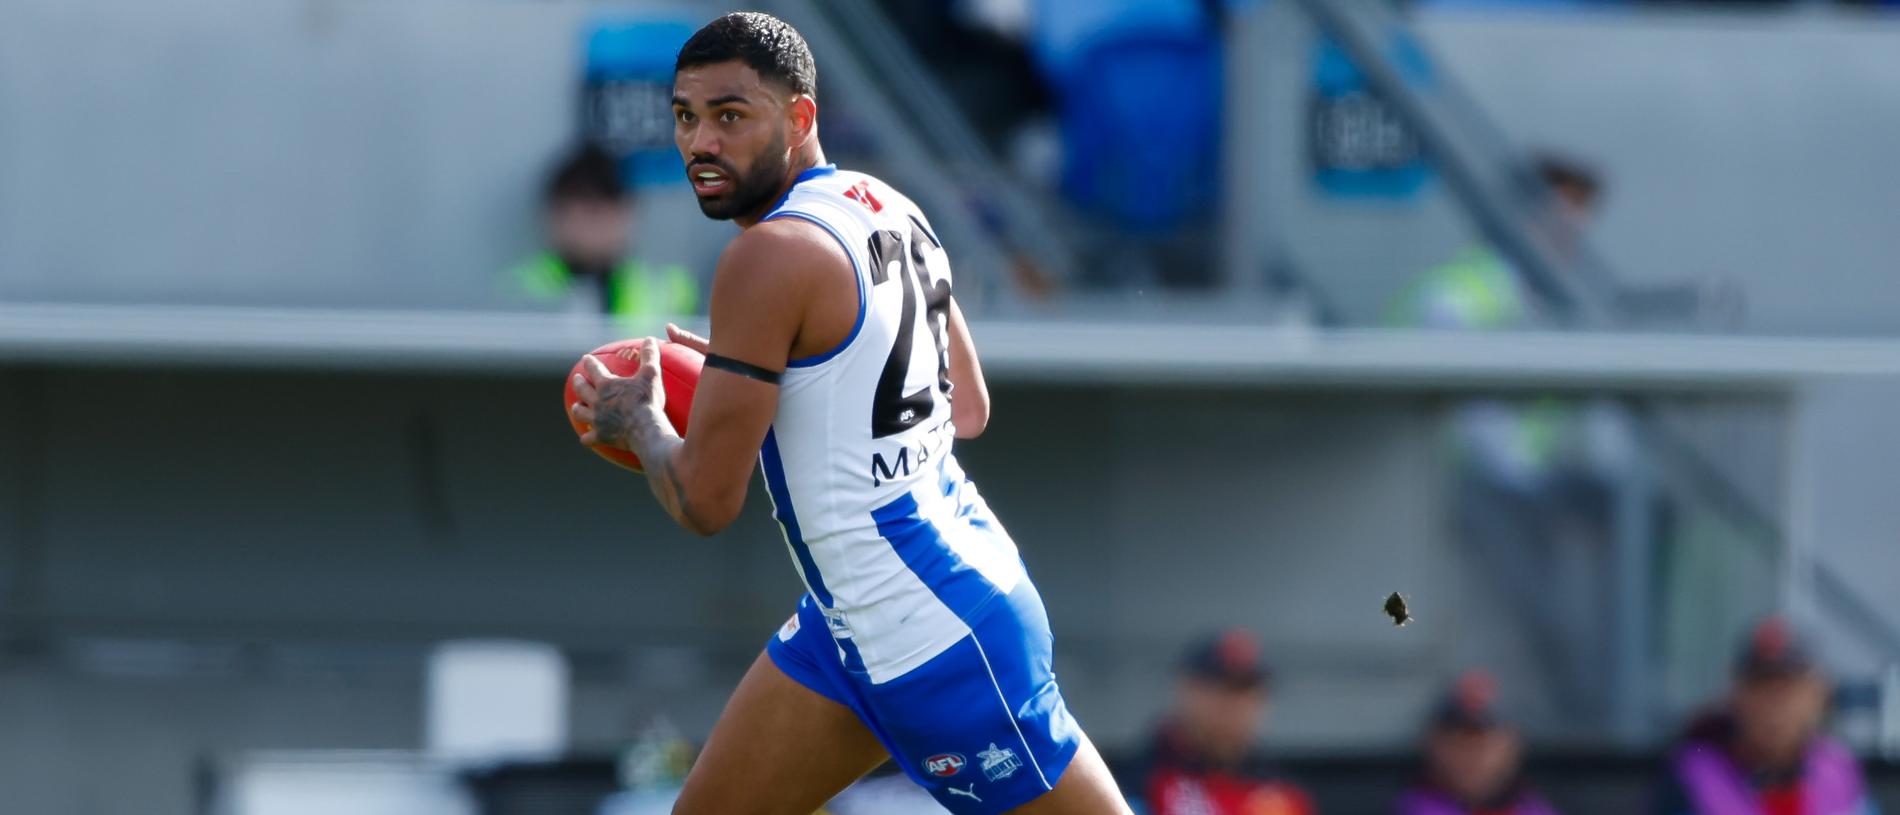 HOBART, AUSTRALIA - AUGUST 26: Tarryn Thomas of the Kangaroos in action during the 2023 AFL Round 24 match between the North Melbourne Kangaroos and the Gold Coast SUNS at Blundstone Arena on August 26, 2023 in Hobart, Australia. (Photo by Dylan Burns/AFL Photos via Getty Images)